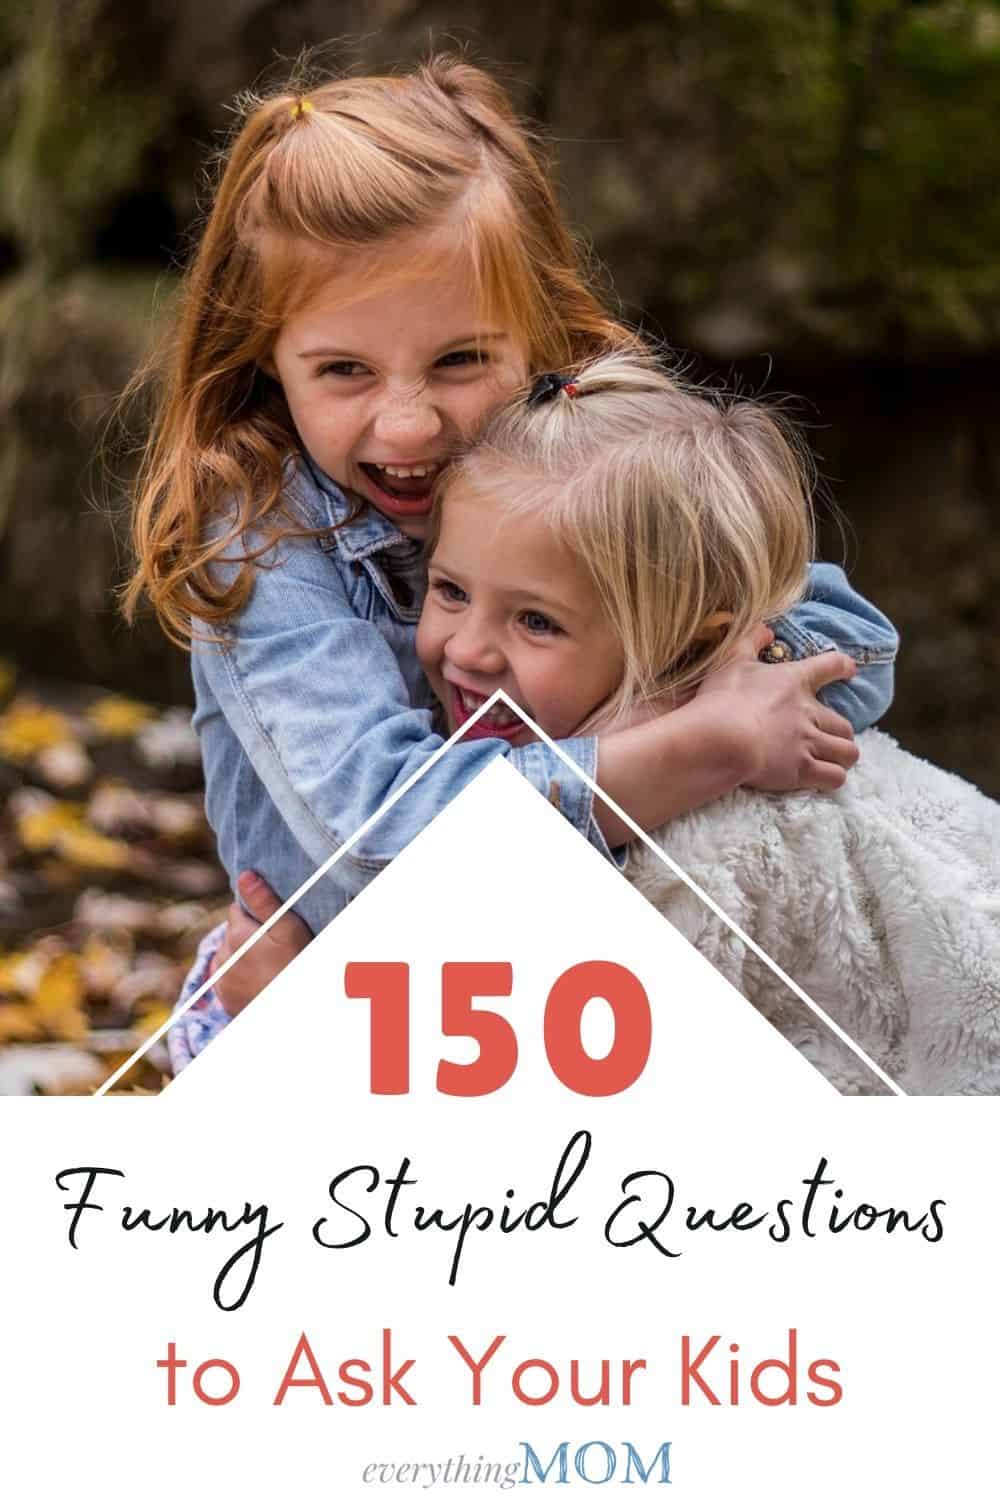 150 Funny Stupid Questions to Ask Your Kids | EverythingMom